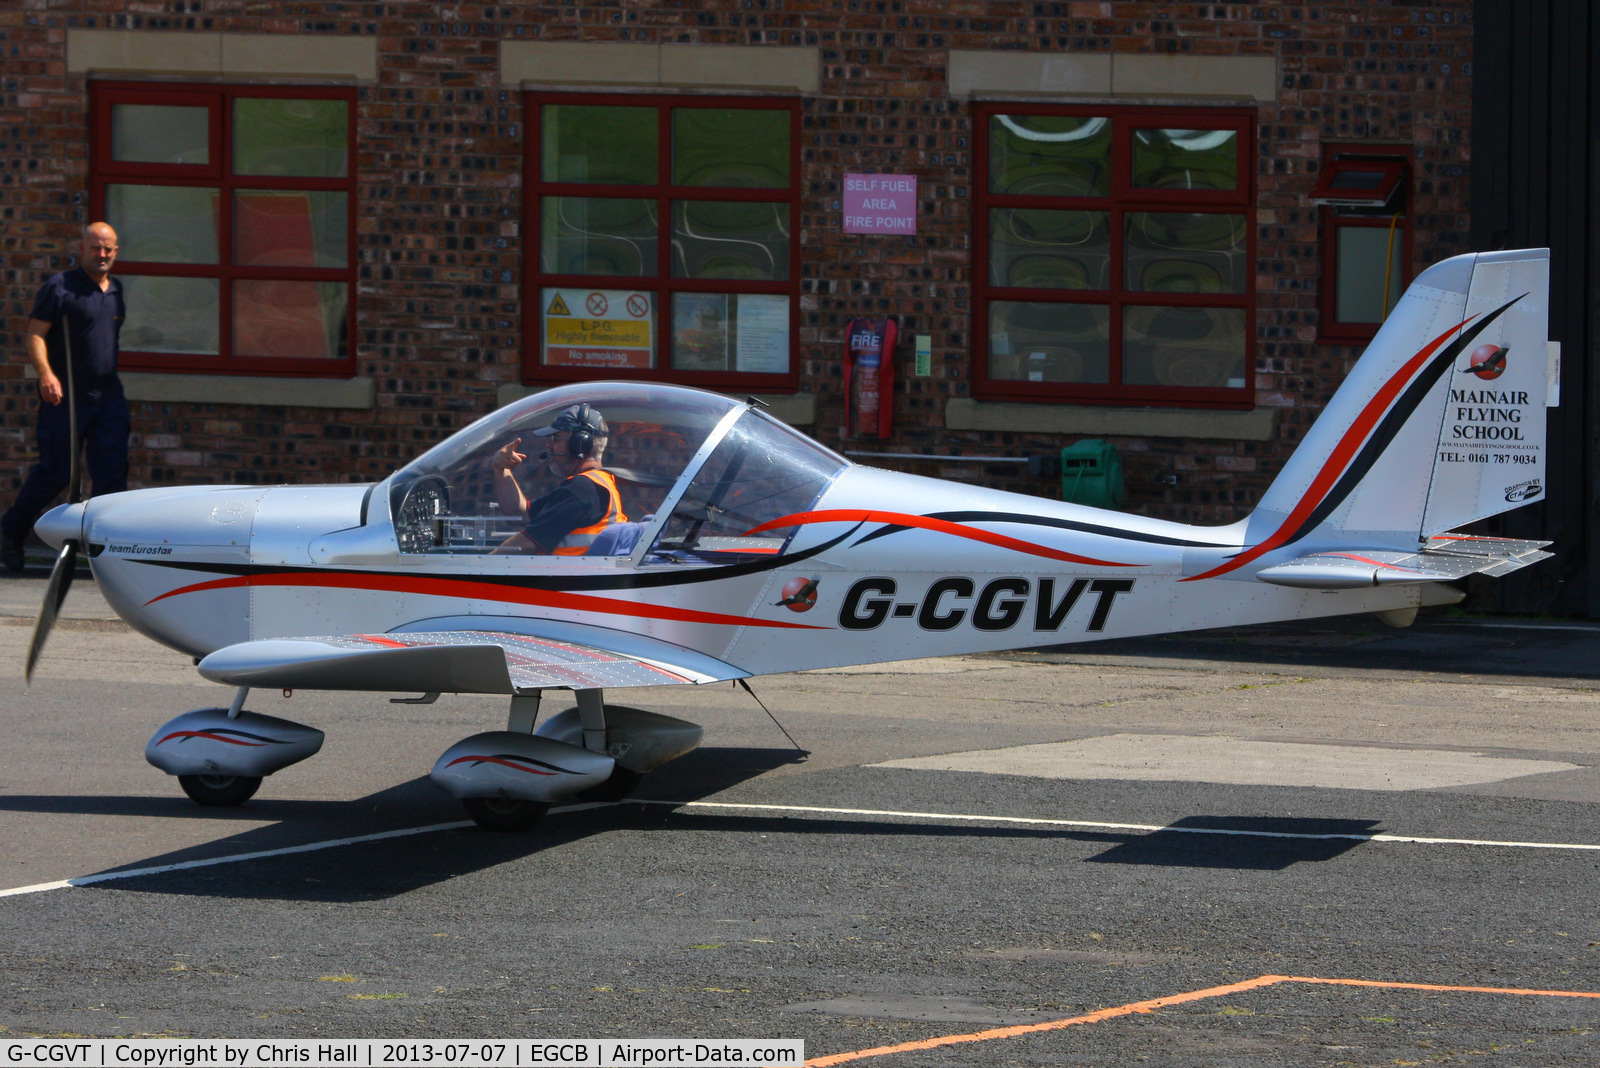 G-CGVT, 2011 Cosmik EV-97 TeamEurostar UK C/N 3402, at the Barton open day and fly in